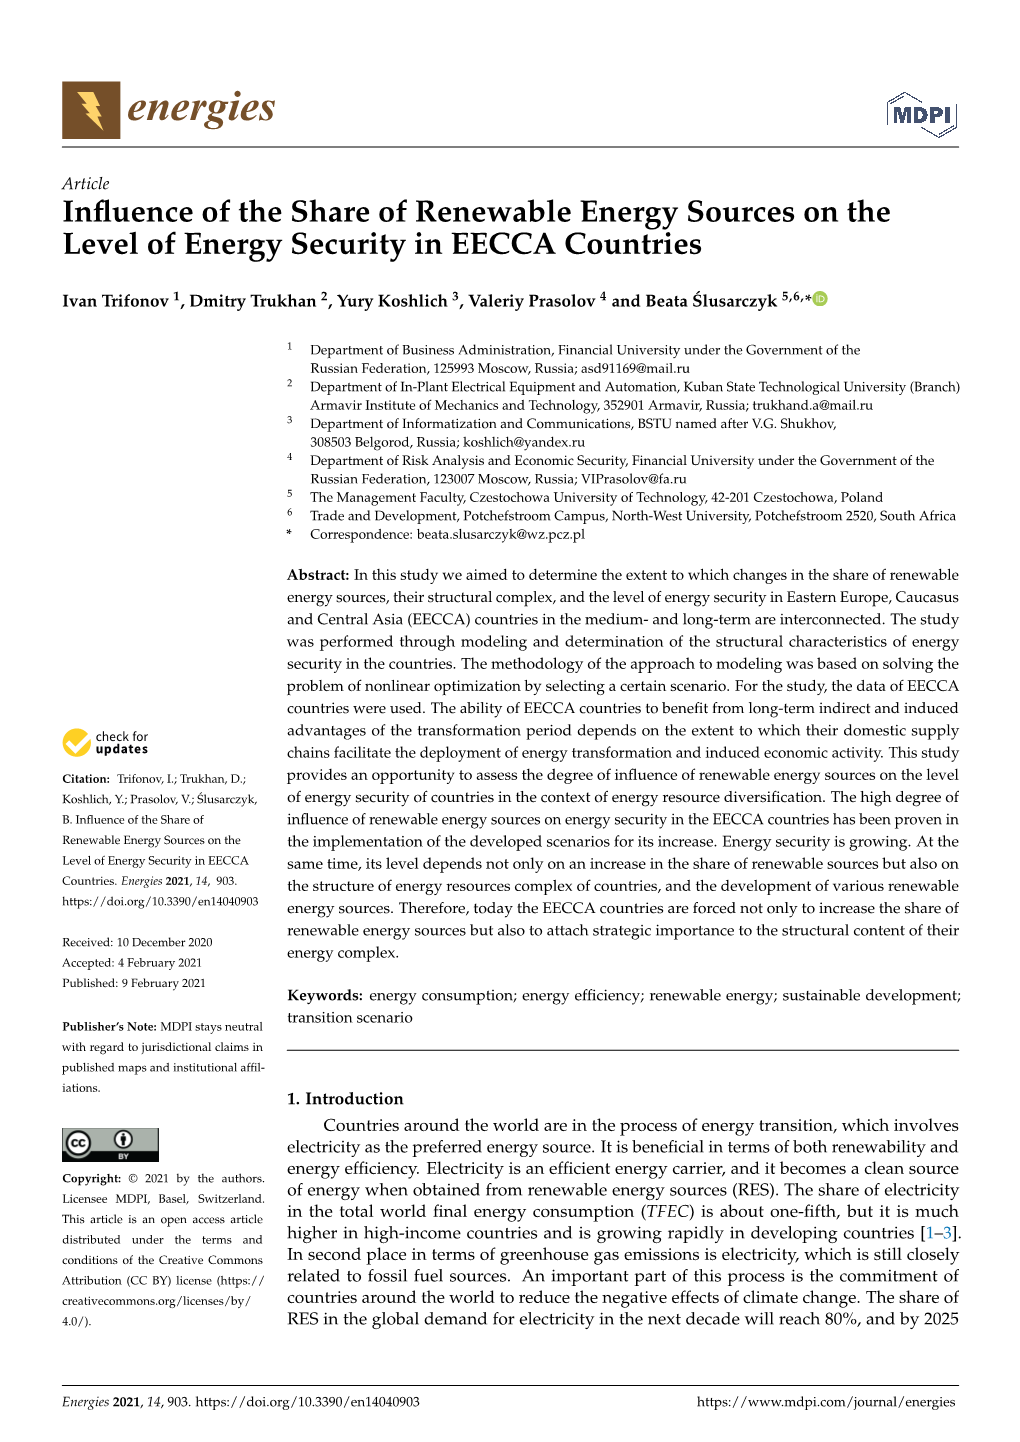 Influence of the Share of Renewable Energy Sources on the Level of Energy Security in EECCA Countries